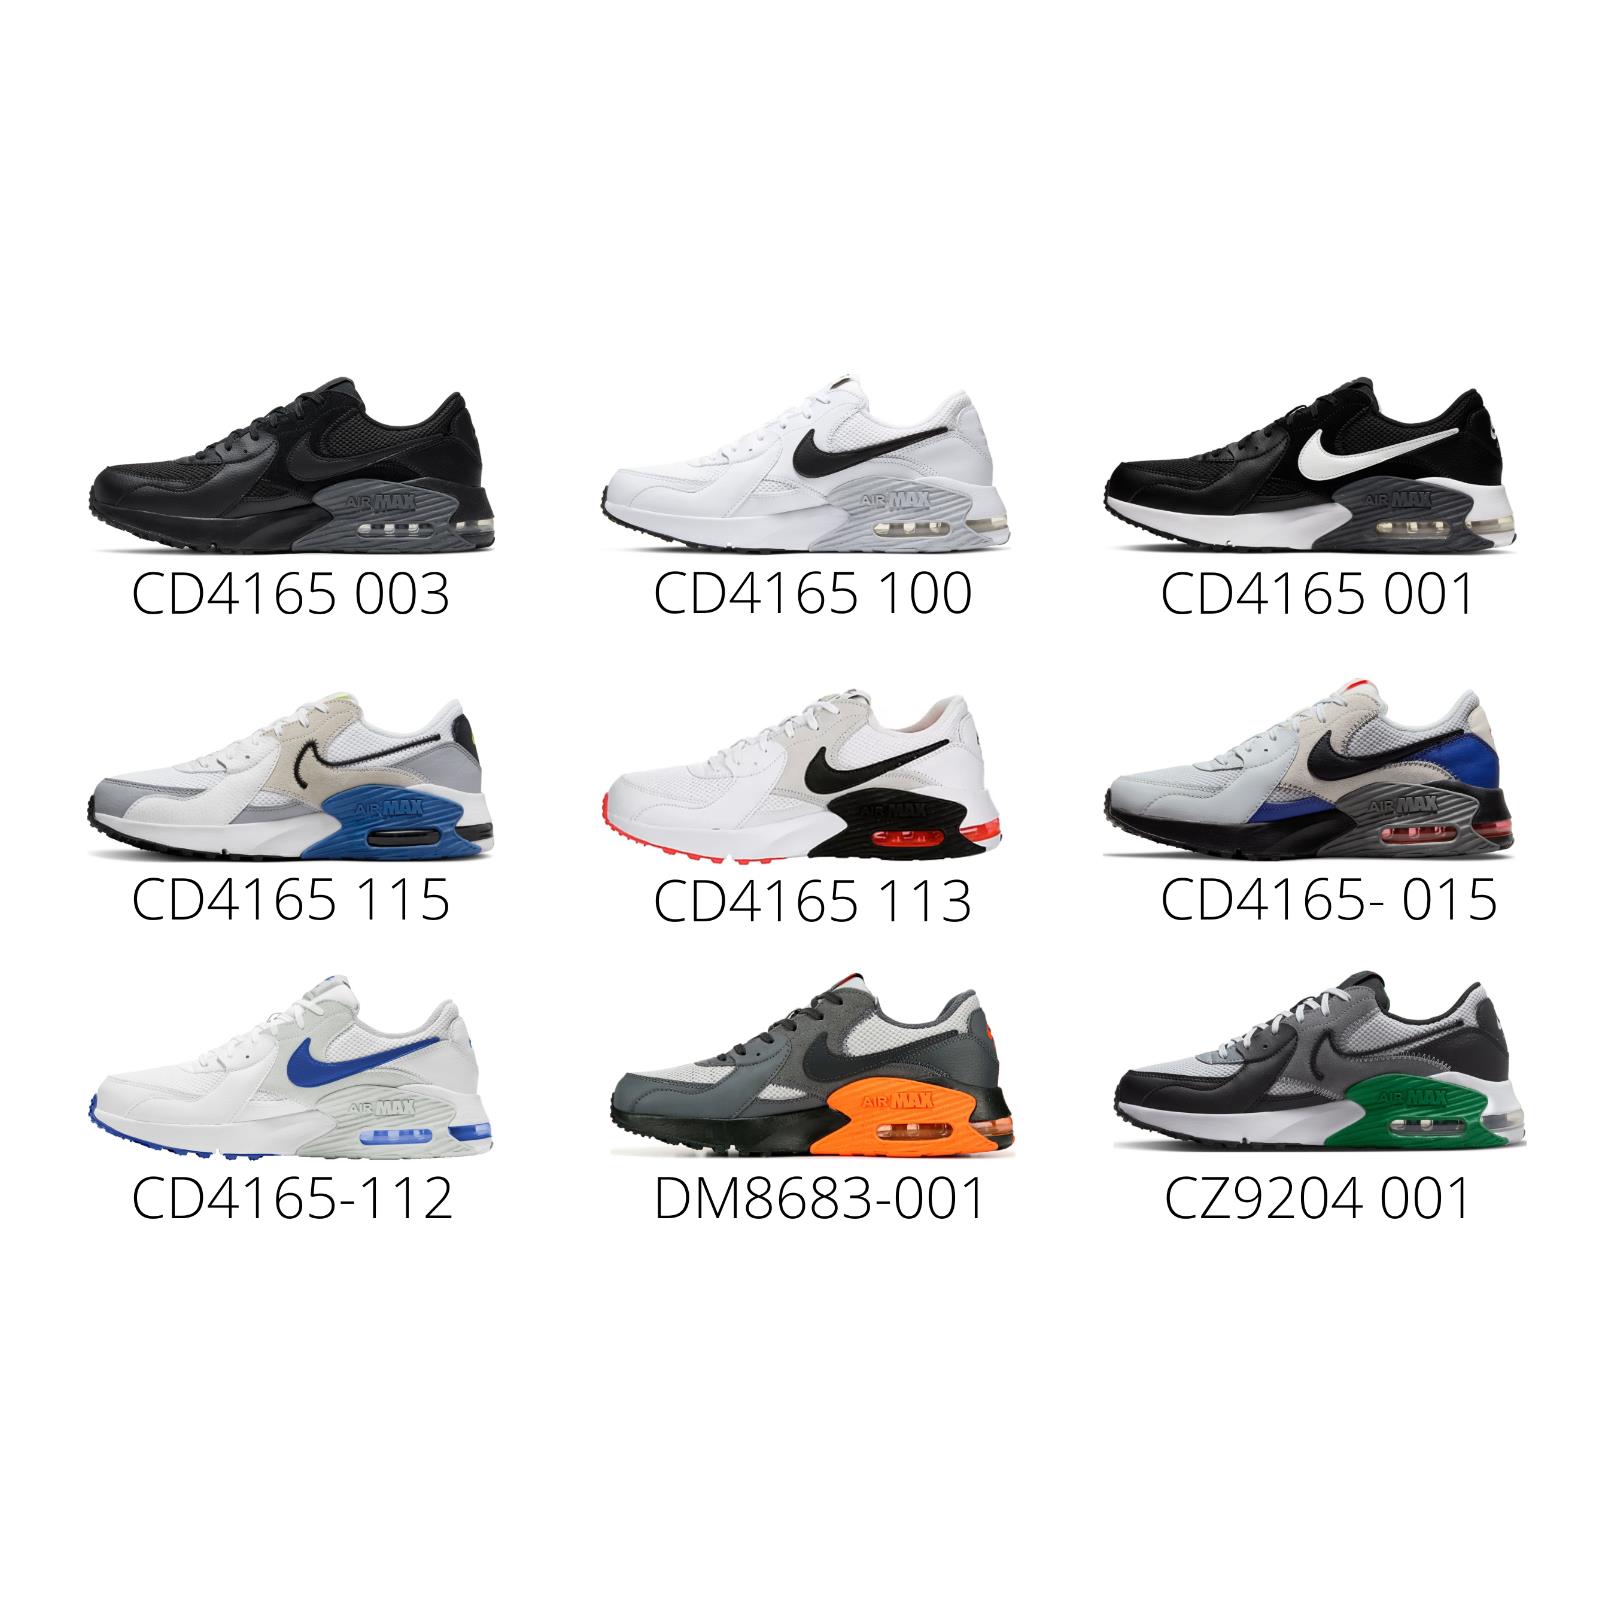 Nike Air Max Excee Multi Color Sneakers Running Training Gym Workout Mens Shoes